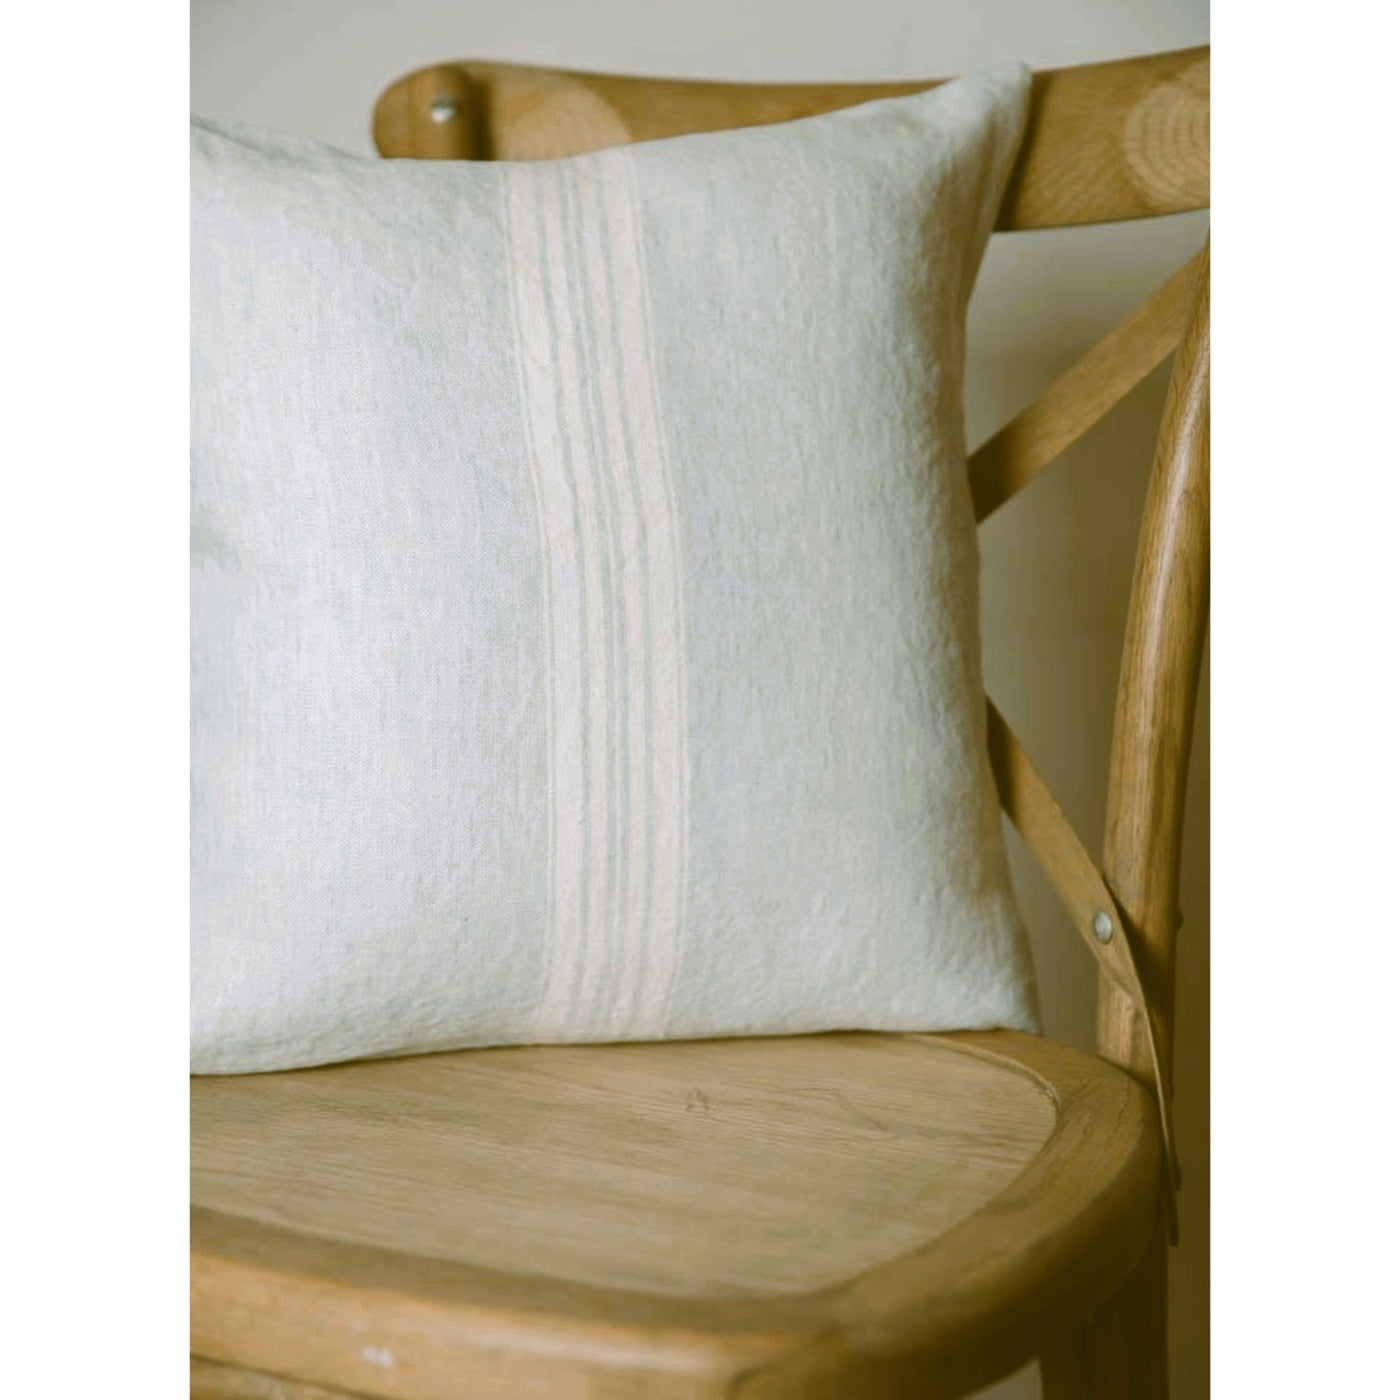 Maison Linen Pillow, Mineral Blue with White stripes. Premium down alternative insert included. On wooden chair.